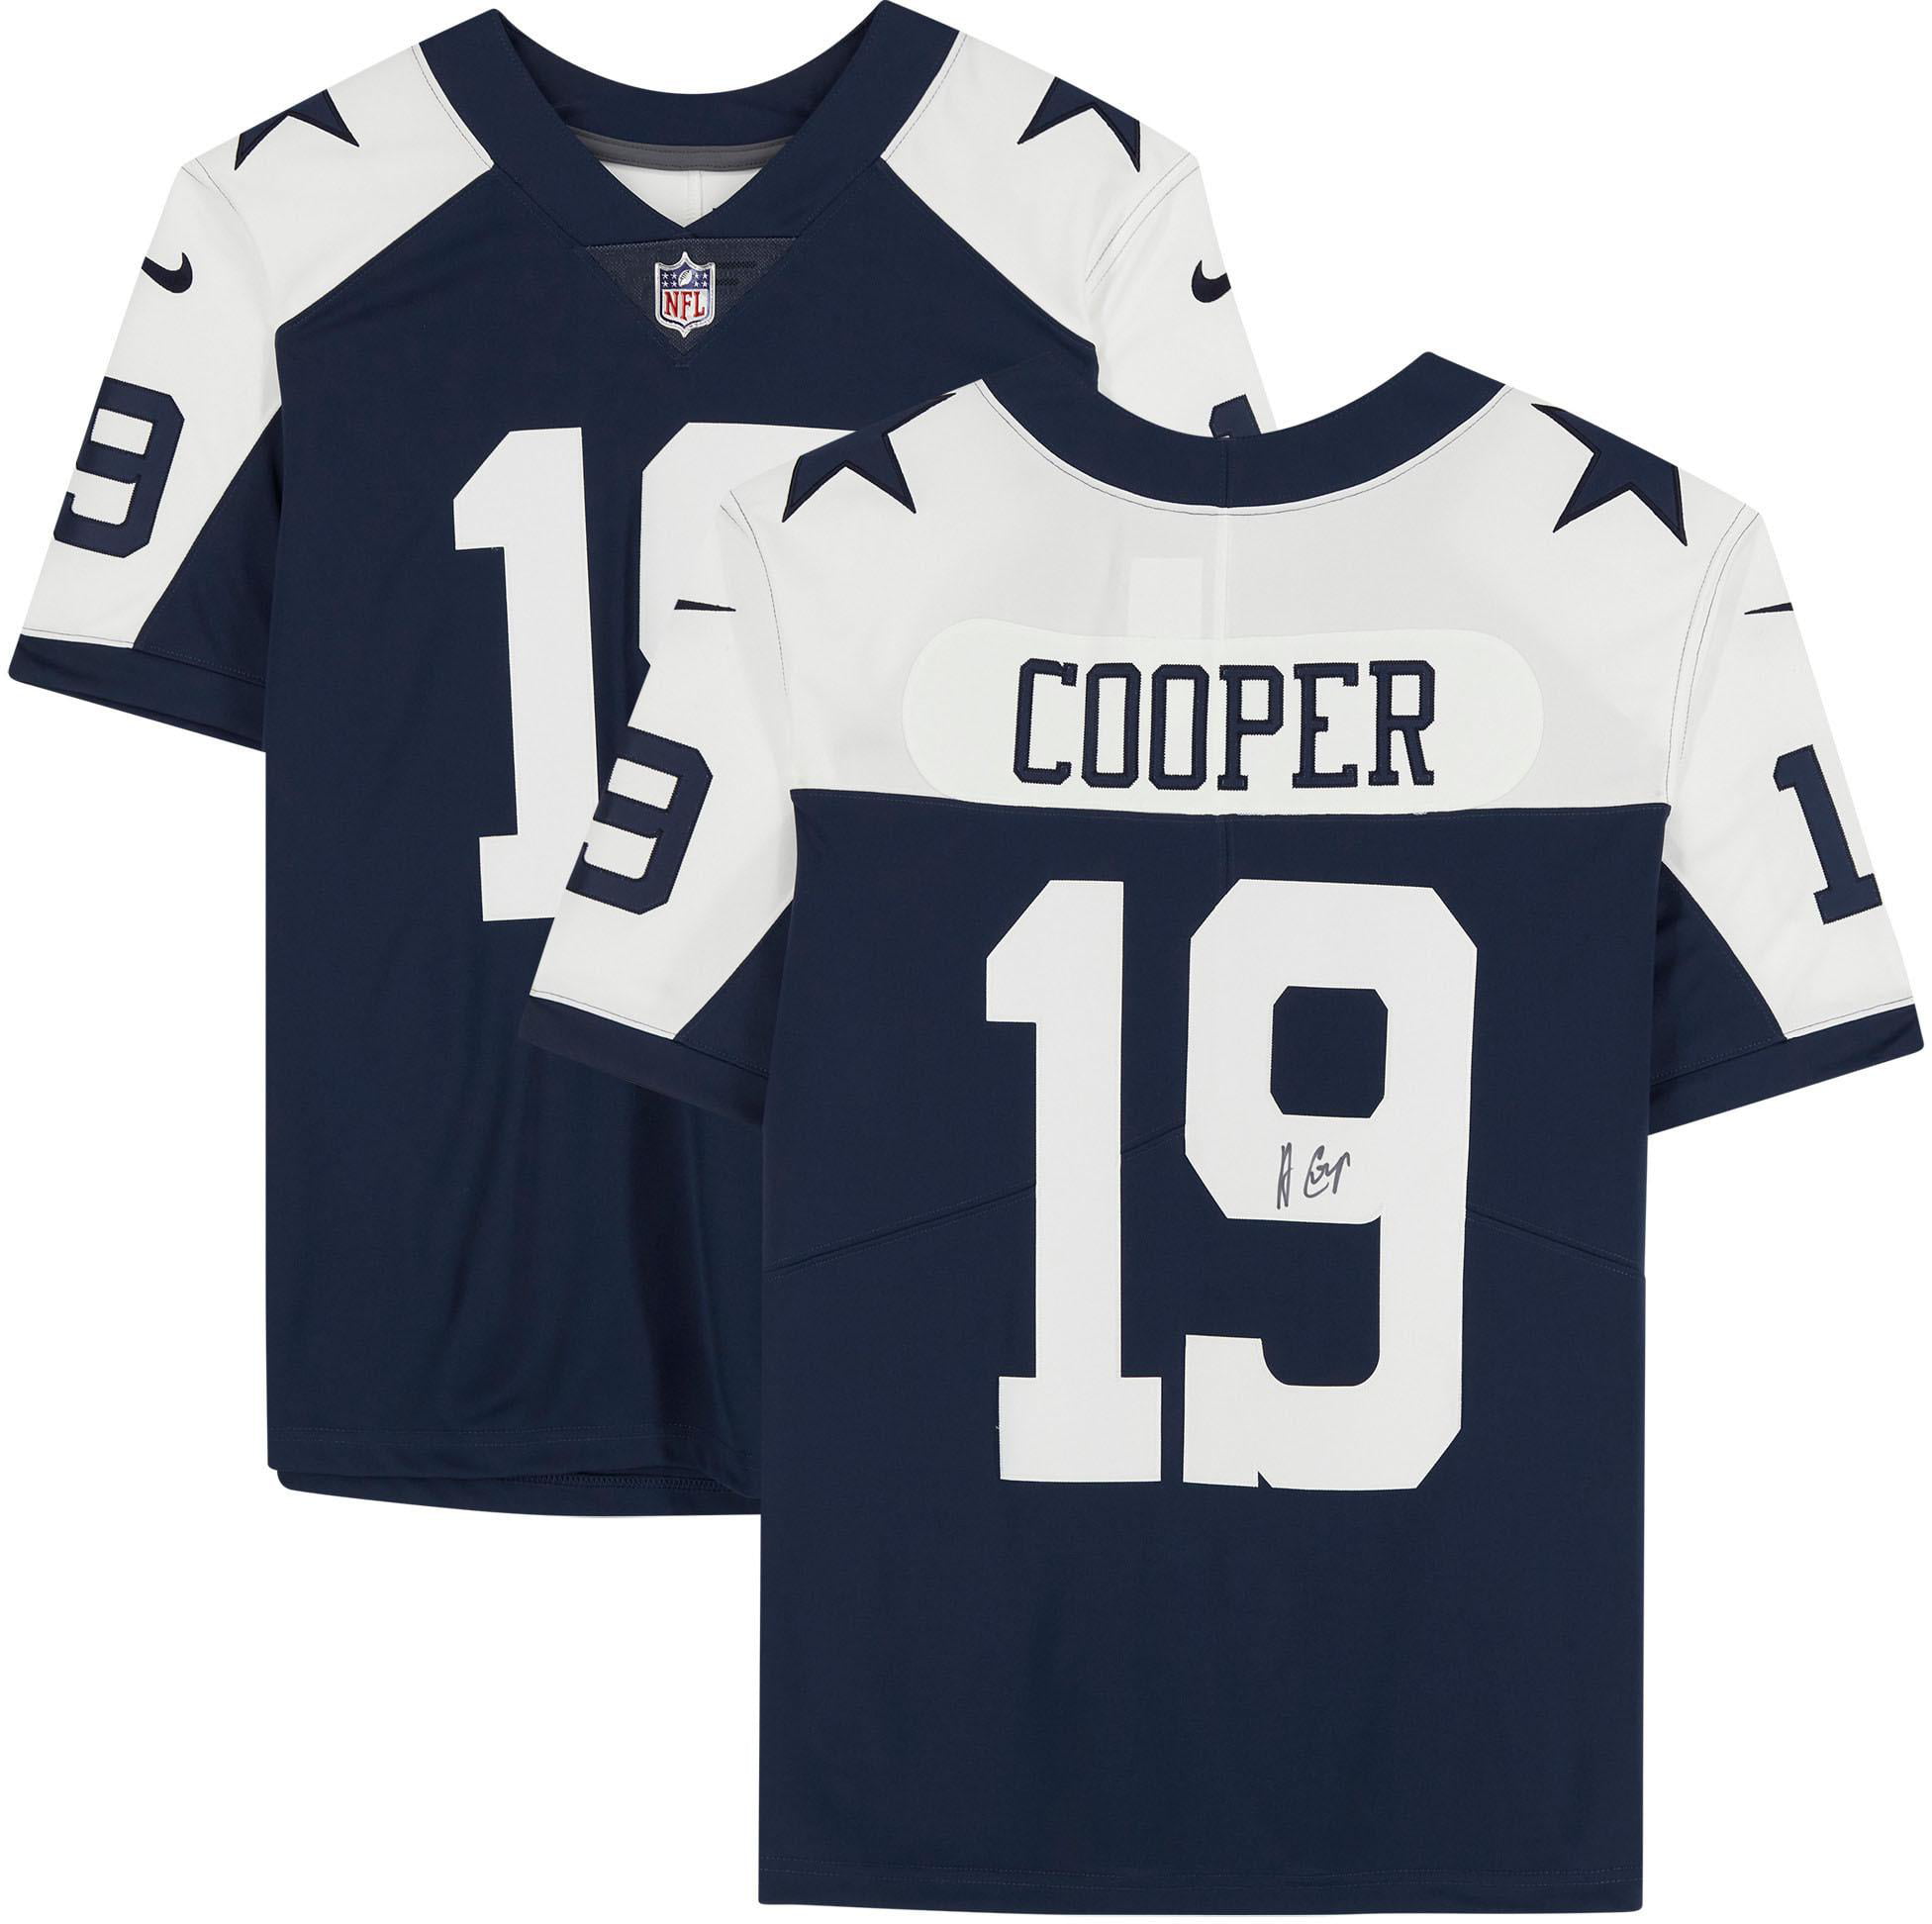 Amari Cooper Dallas Cowboys Autographed 16 x 20 White Jersey Running Photograph Fanatics Authentic Certified 